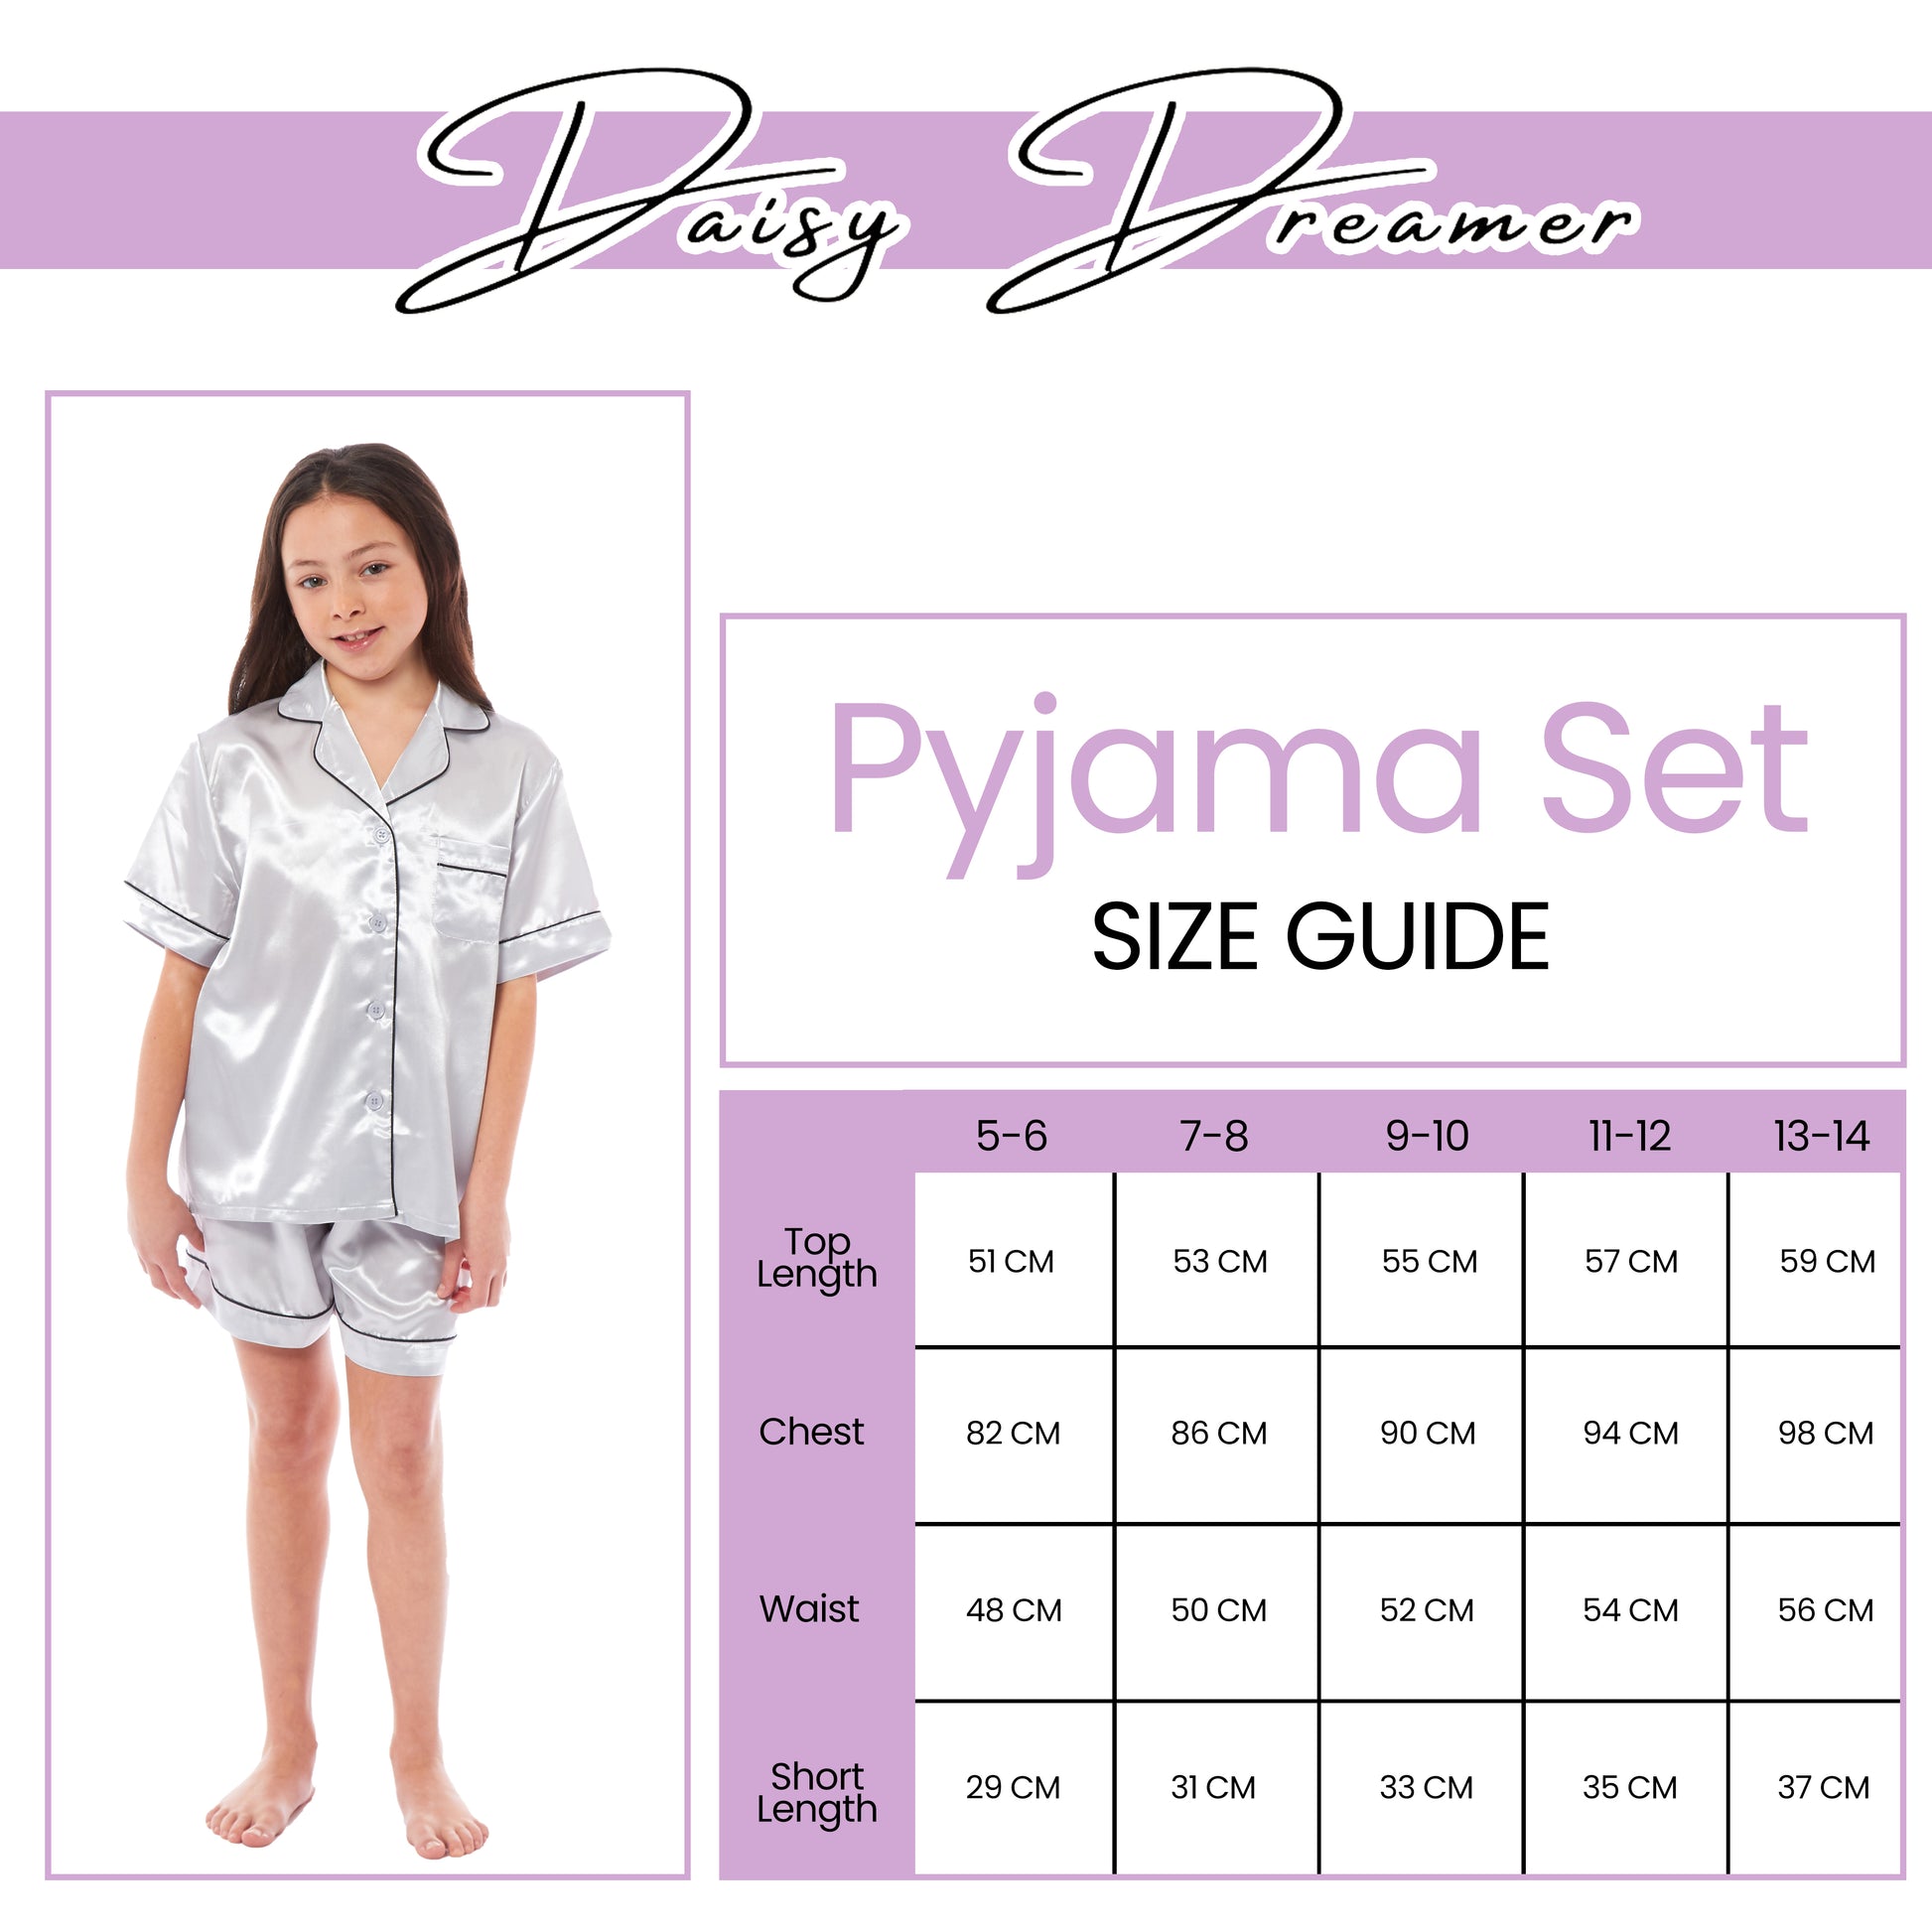 Kids Satin Silk Pyjama Set for Girls with Button-Down Shirt and Loose-Fitting Pants Comfortable Loungewear in Black Pink Grey Ages 5-14 by Daisy Dreamer. Buy now for £12.00. A Pyjamas by Daisy Dreamer. 11-12,13-14,5-6,7-8,9-10,_Hi_chtgptapp_optimised_this